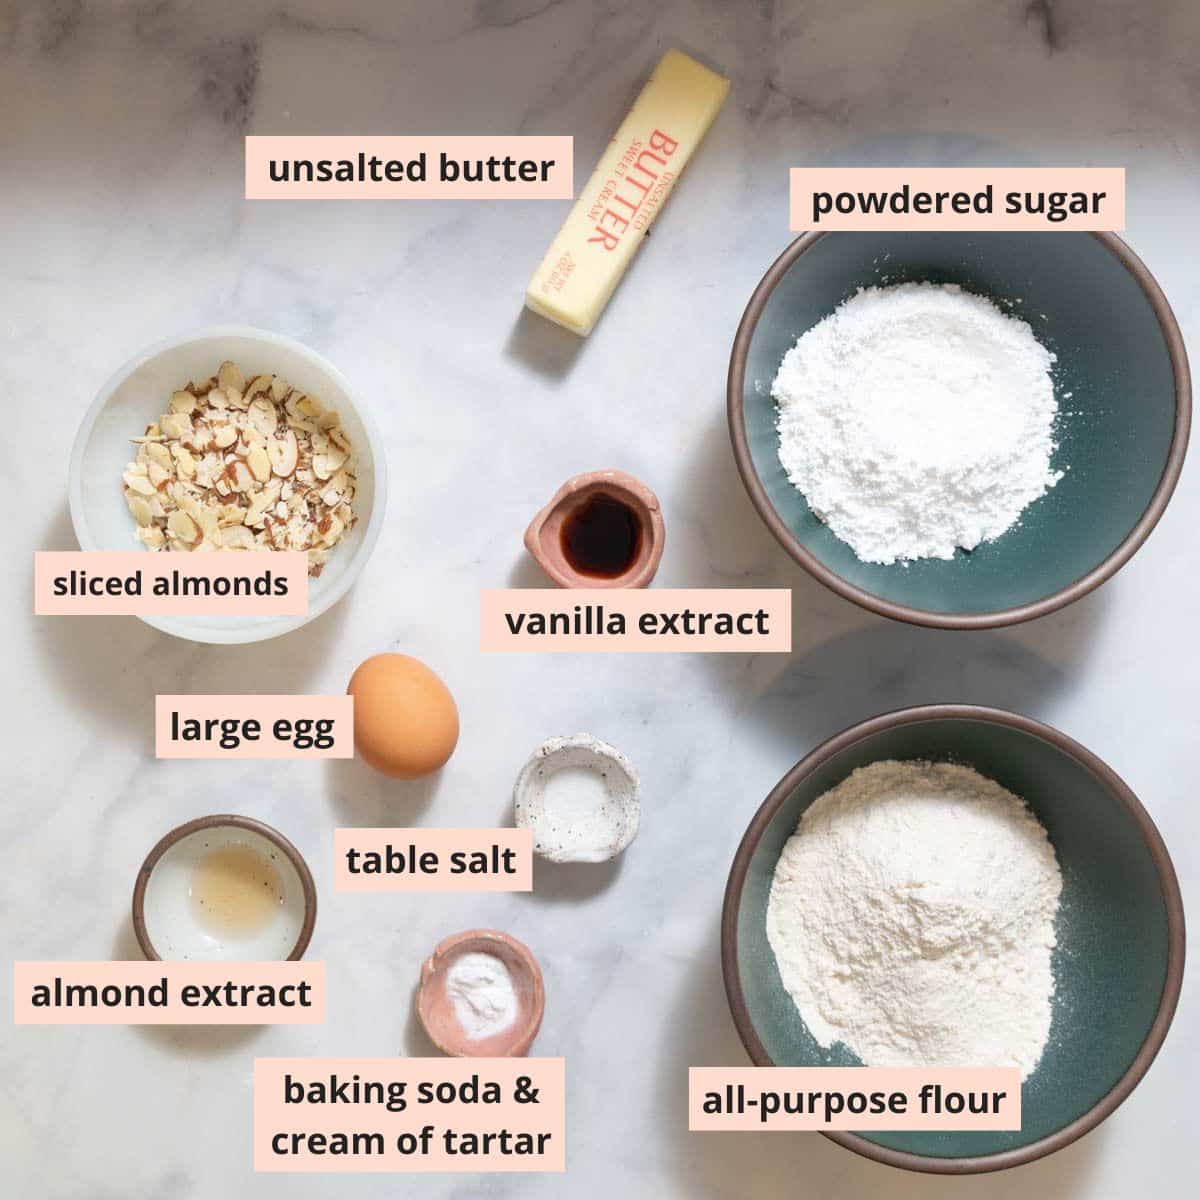 Labeled recipe ingredients.